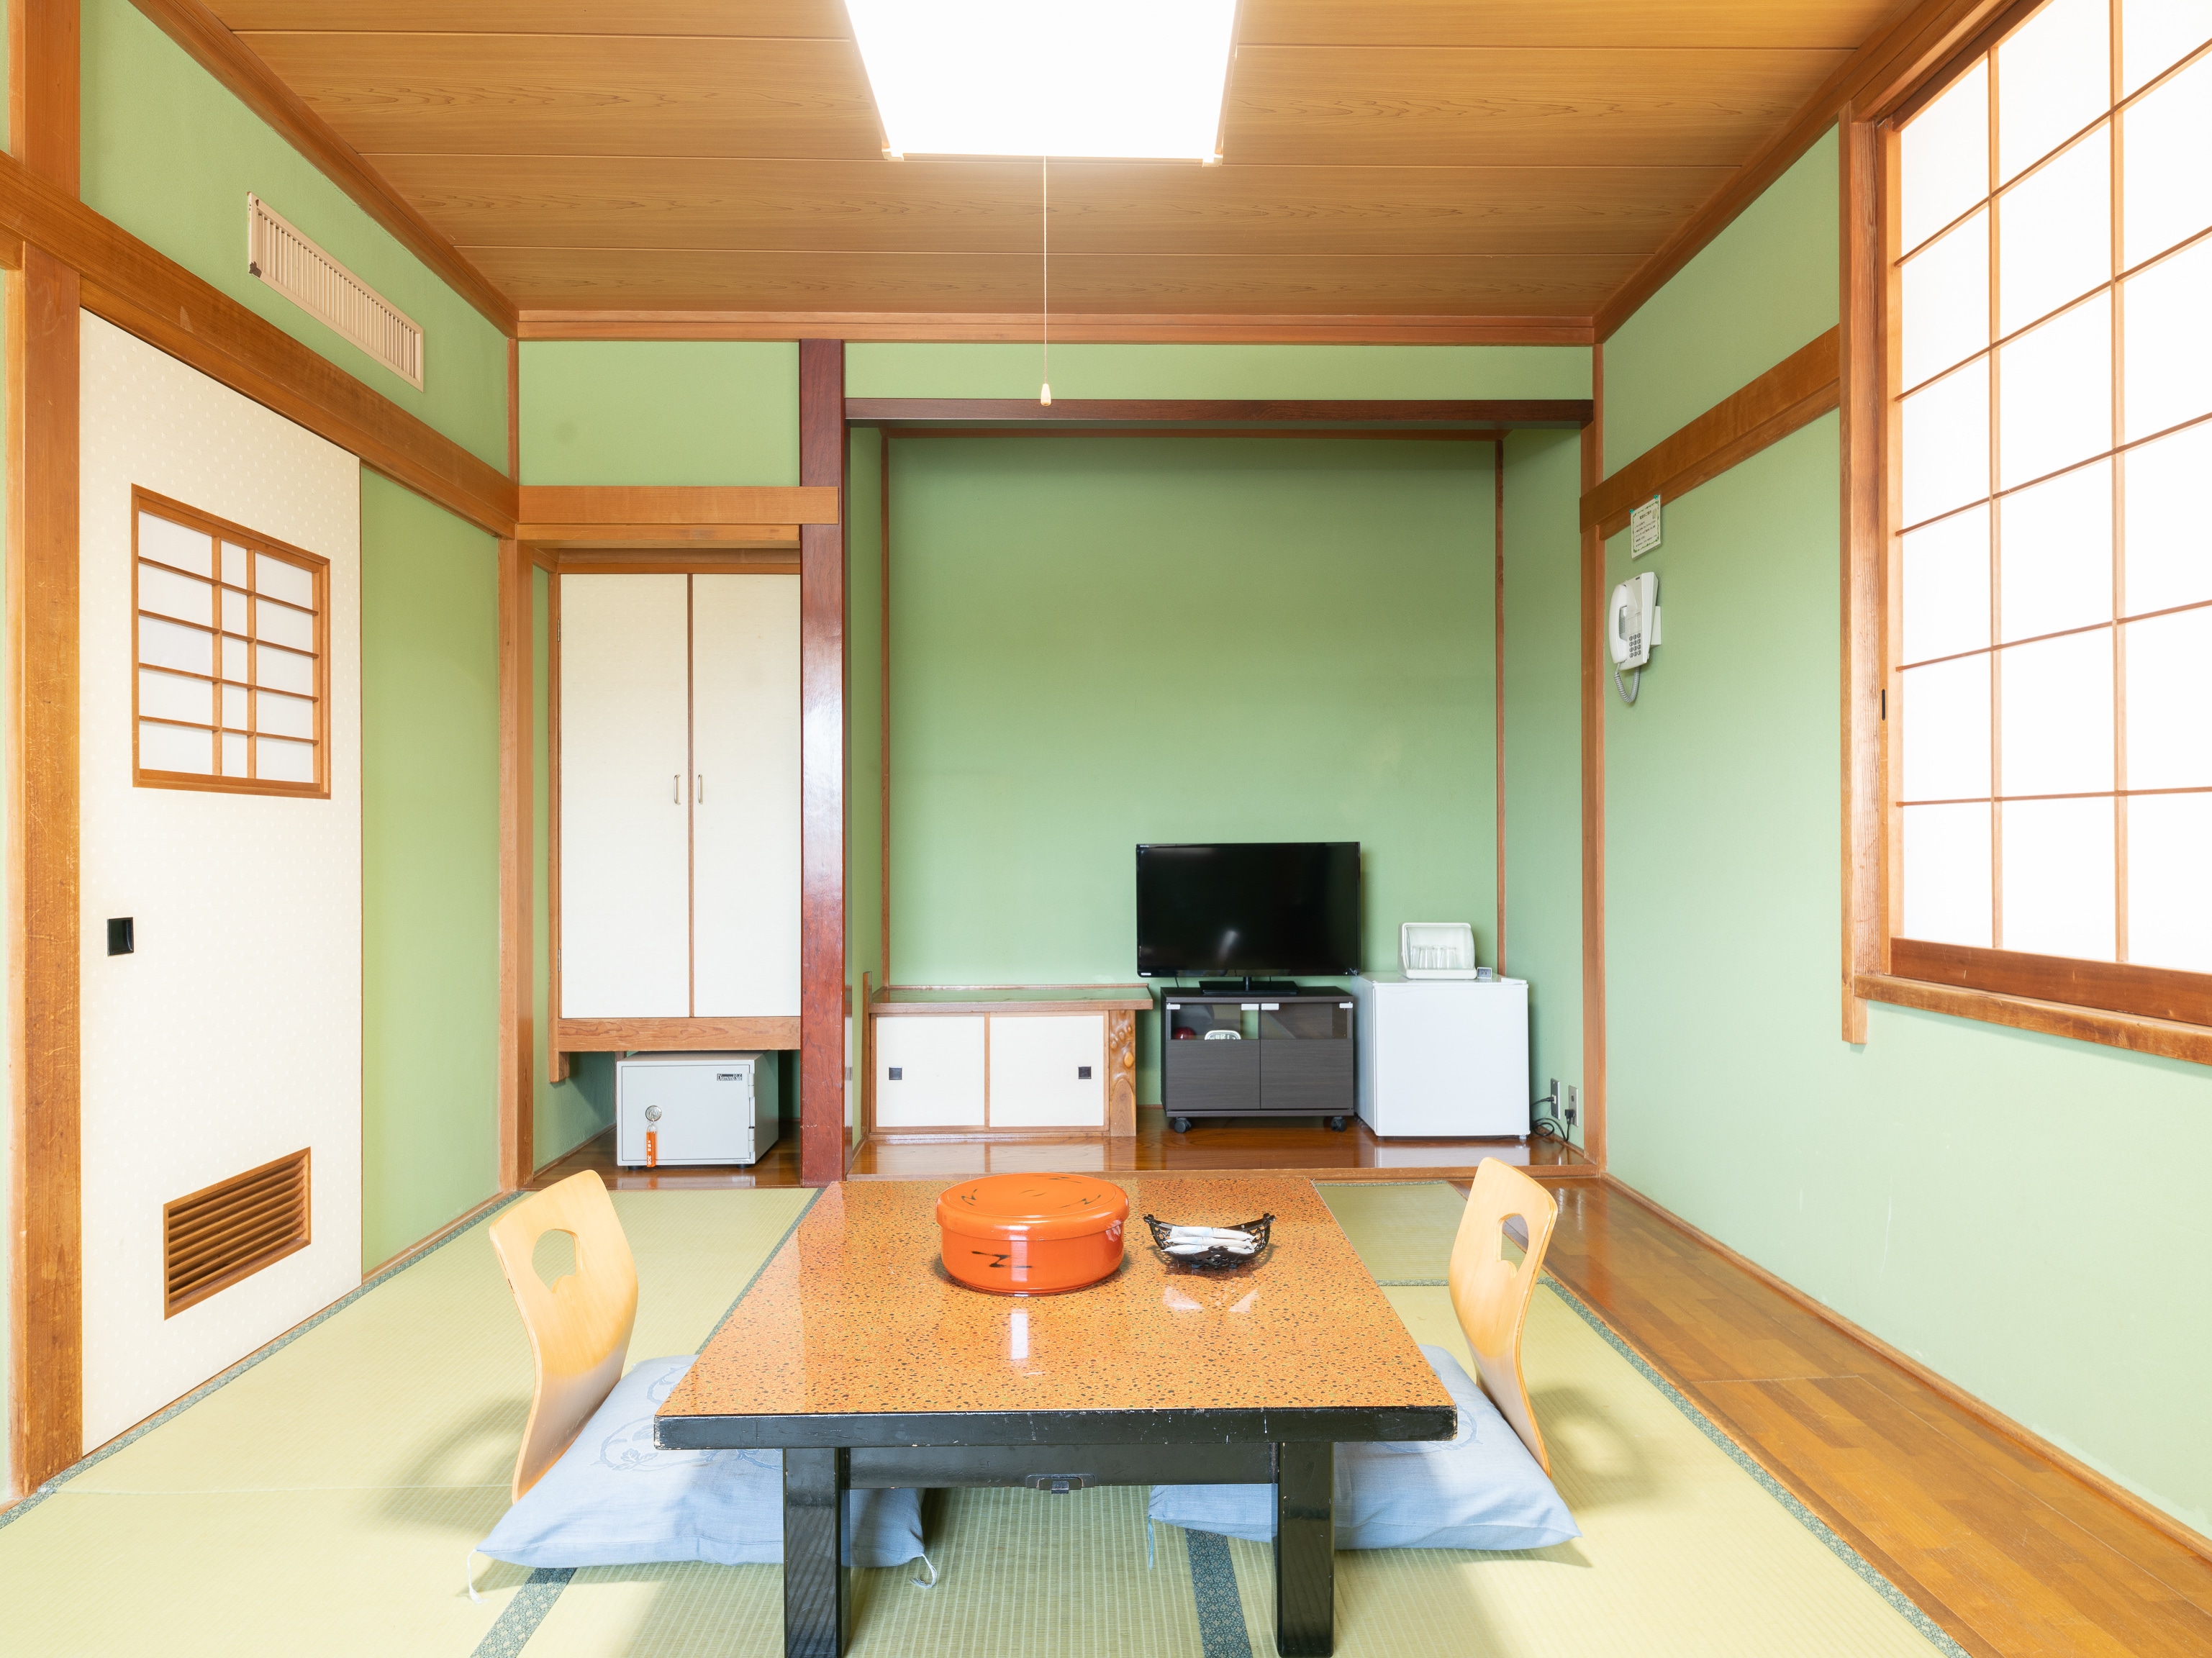 [Non-smoking] Japanese-style room for 1 to 4 people (no bath)